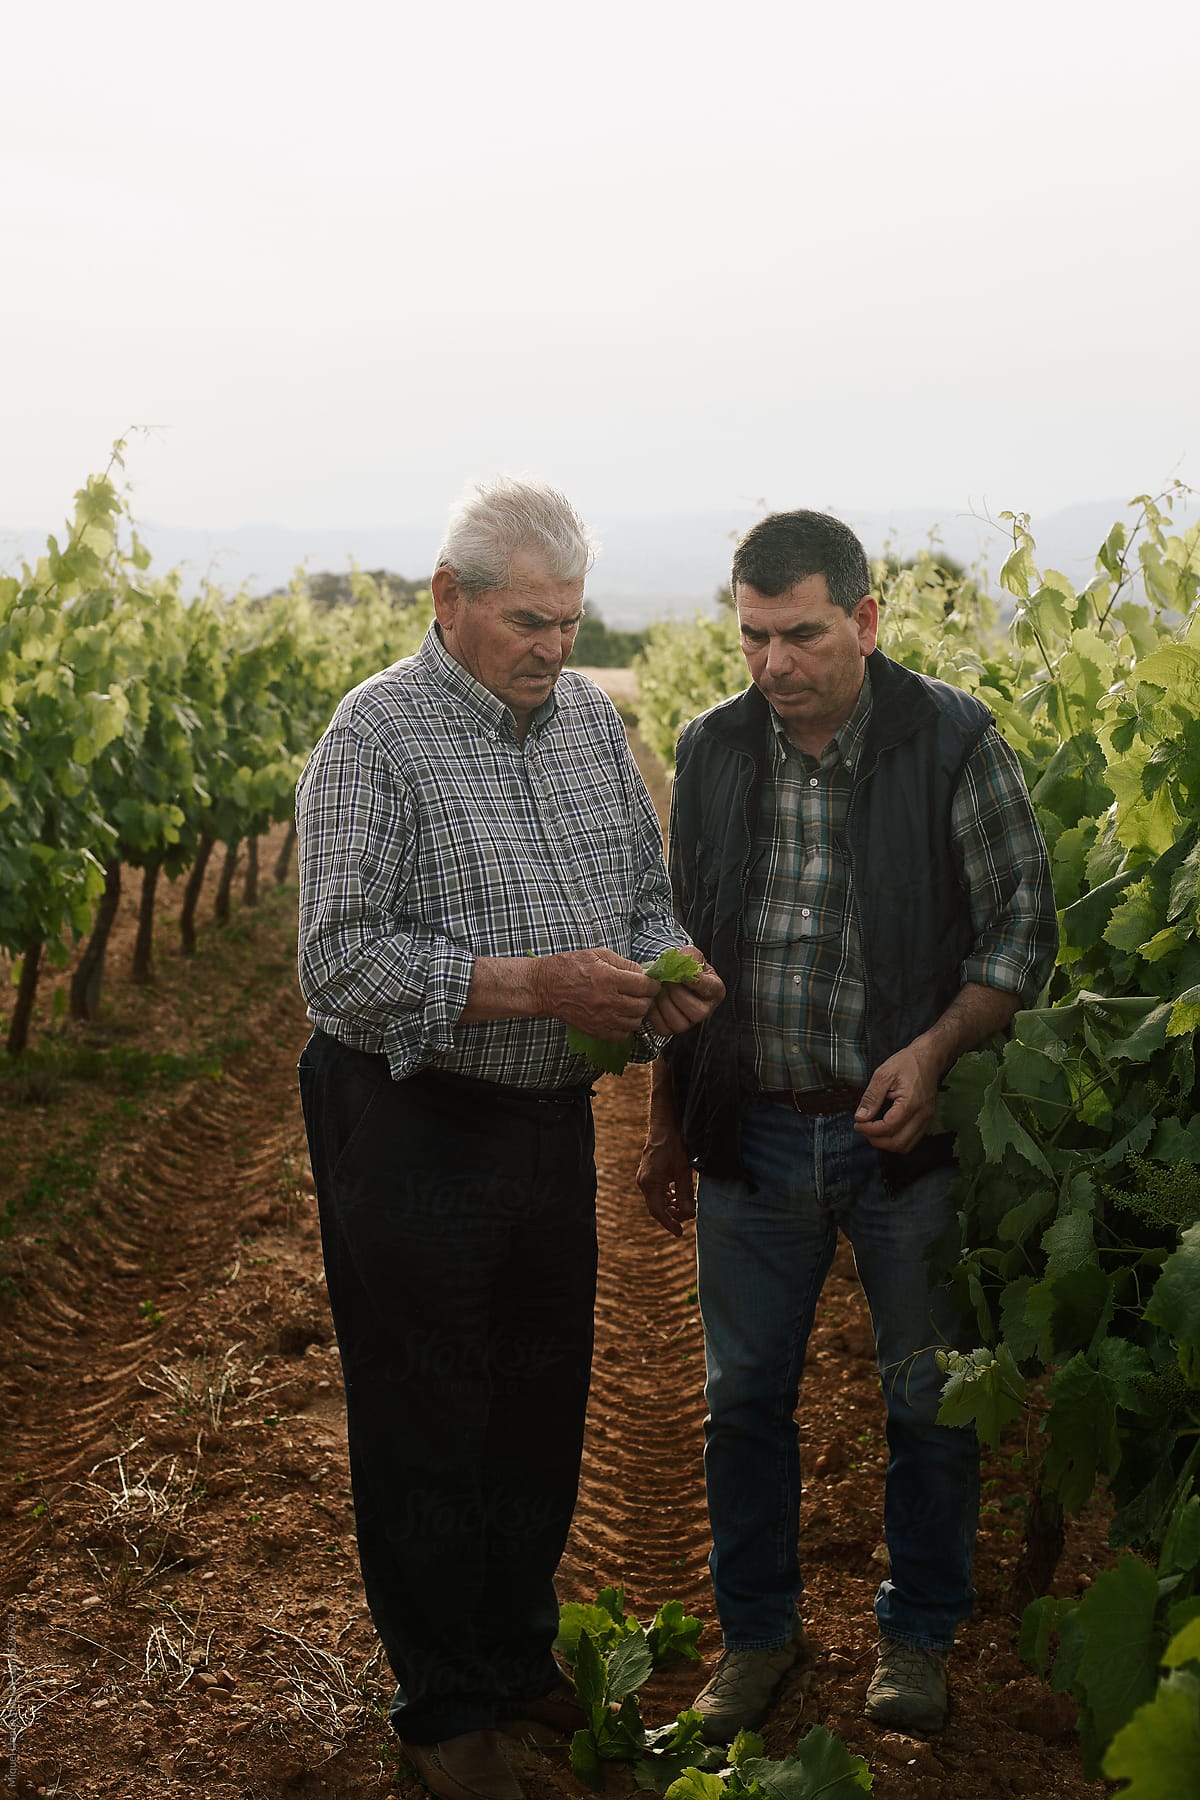 Father and son checking the leaves of the vines